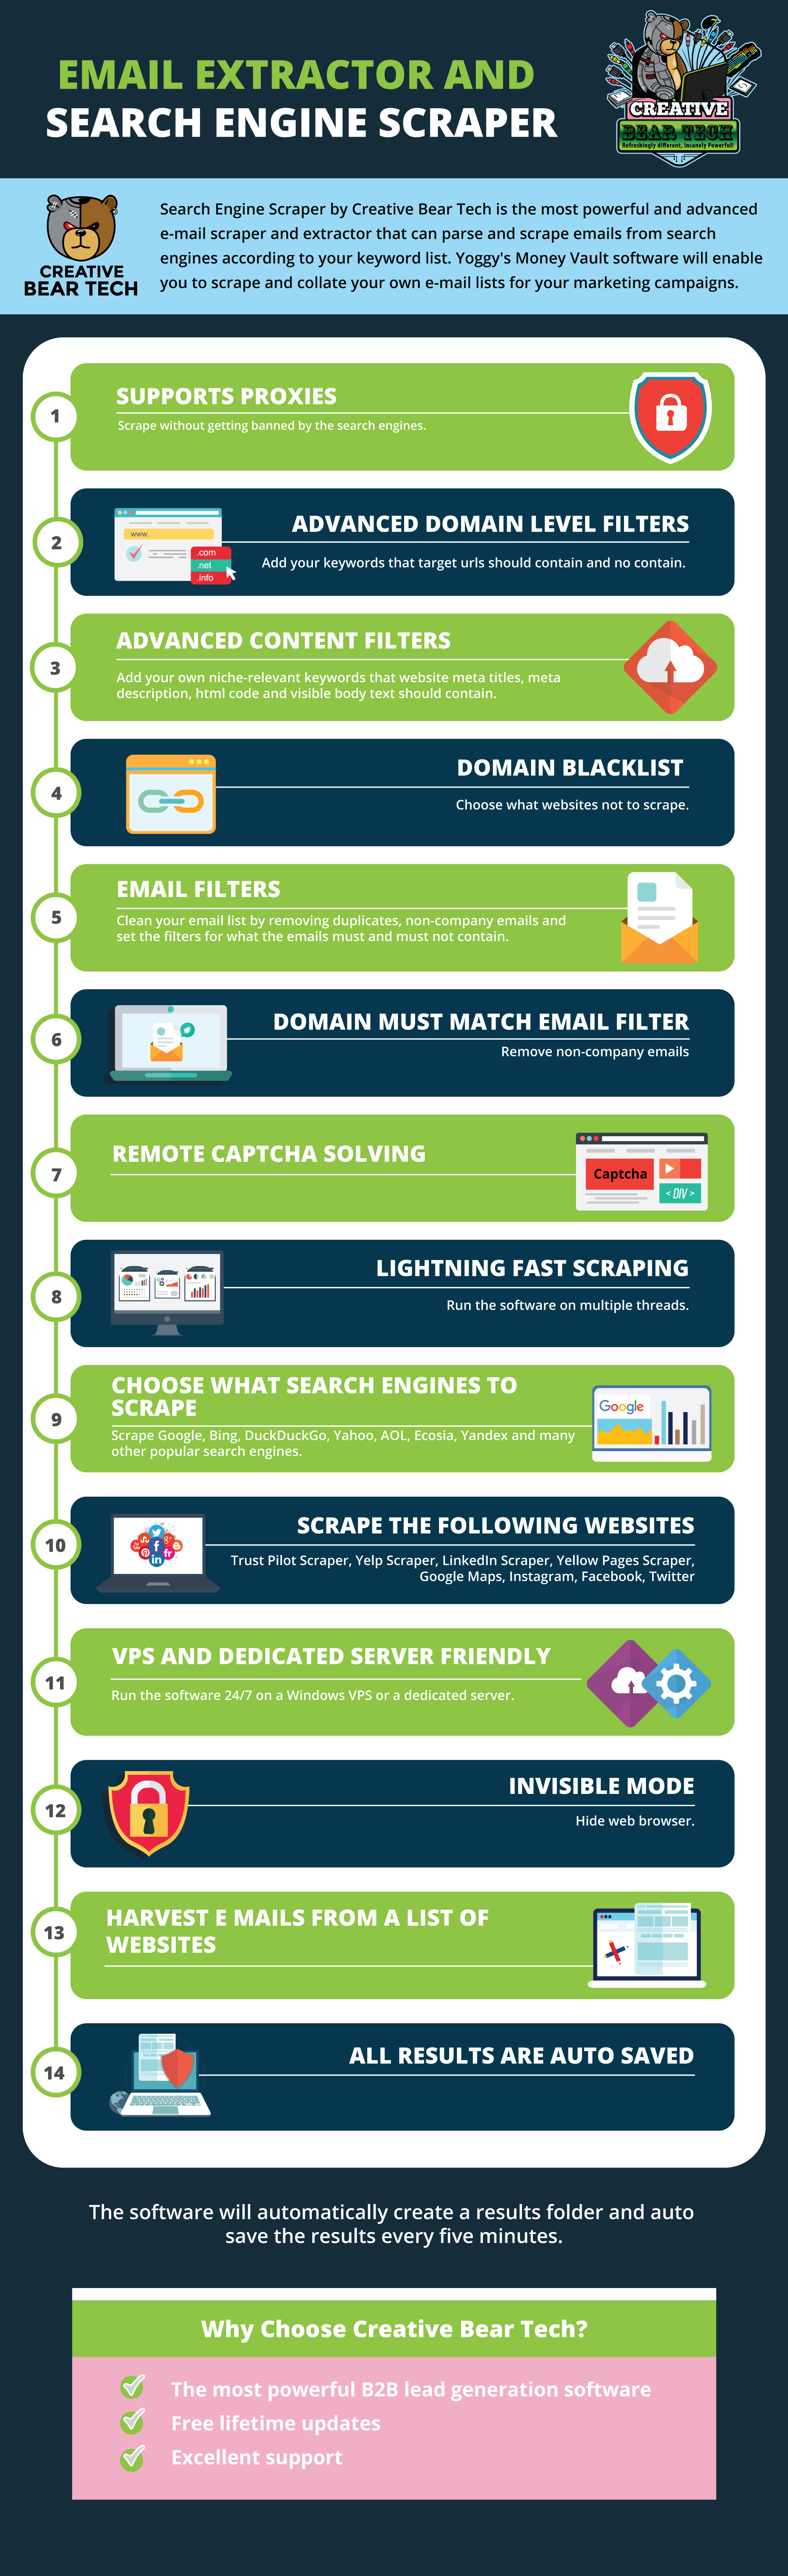 How is web scraping used in SEO?